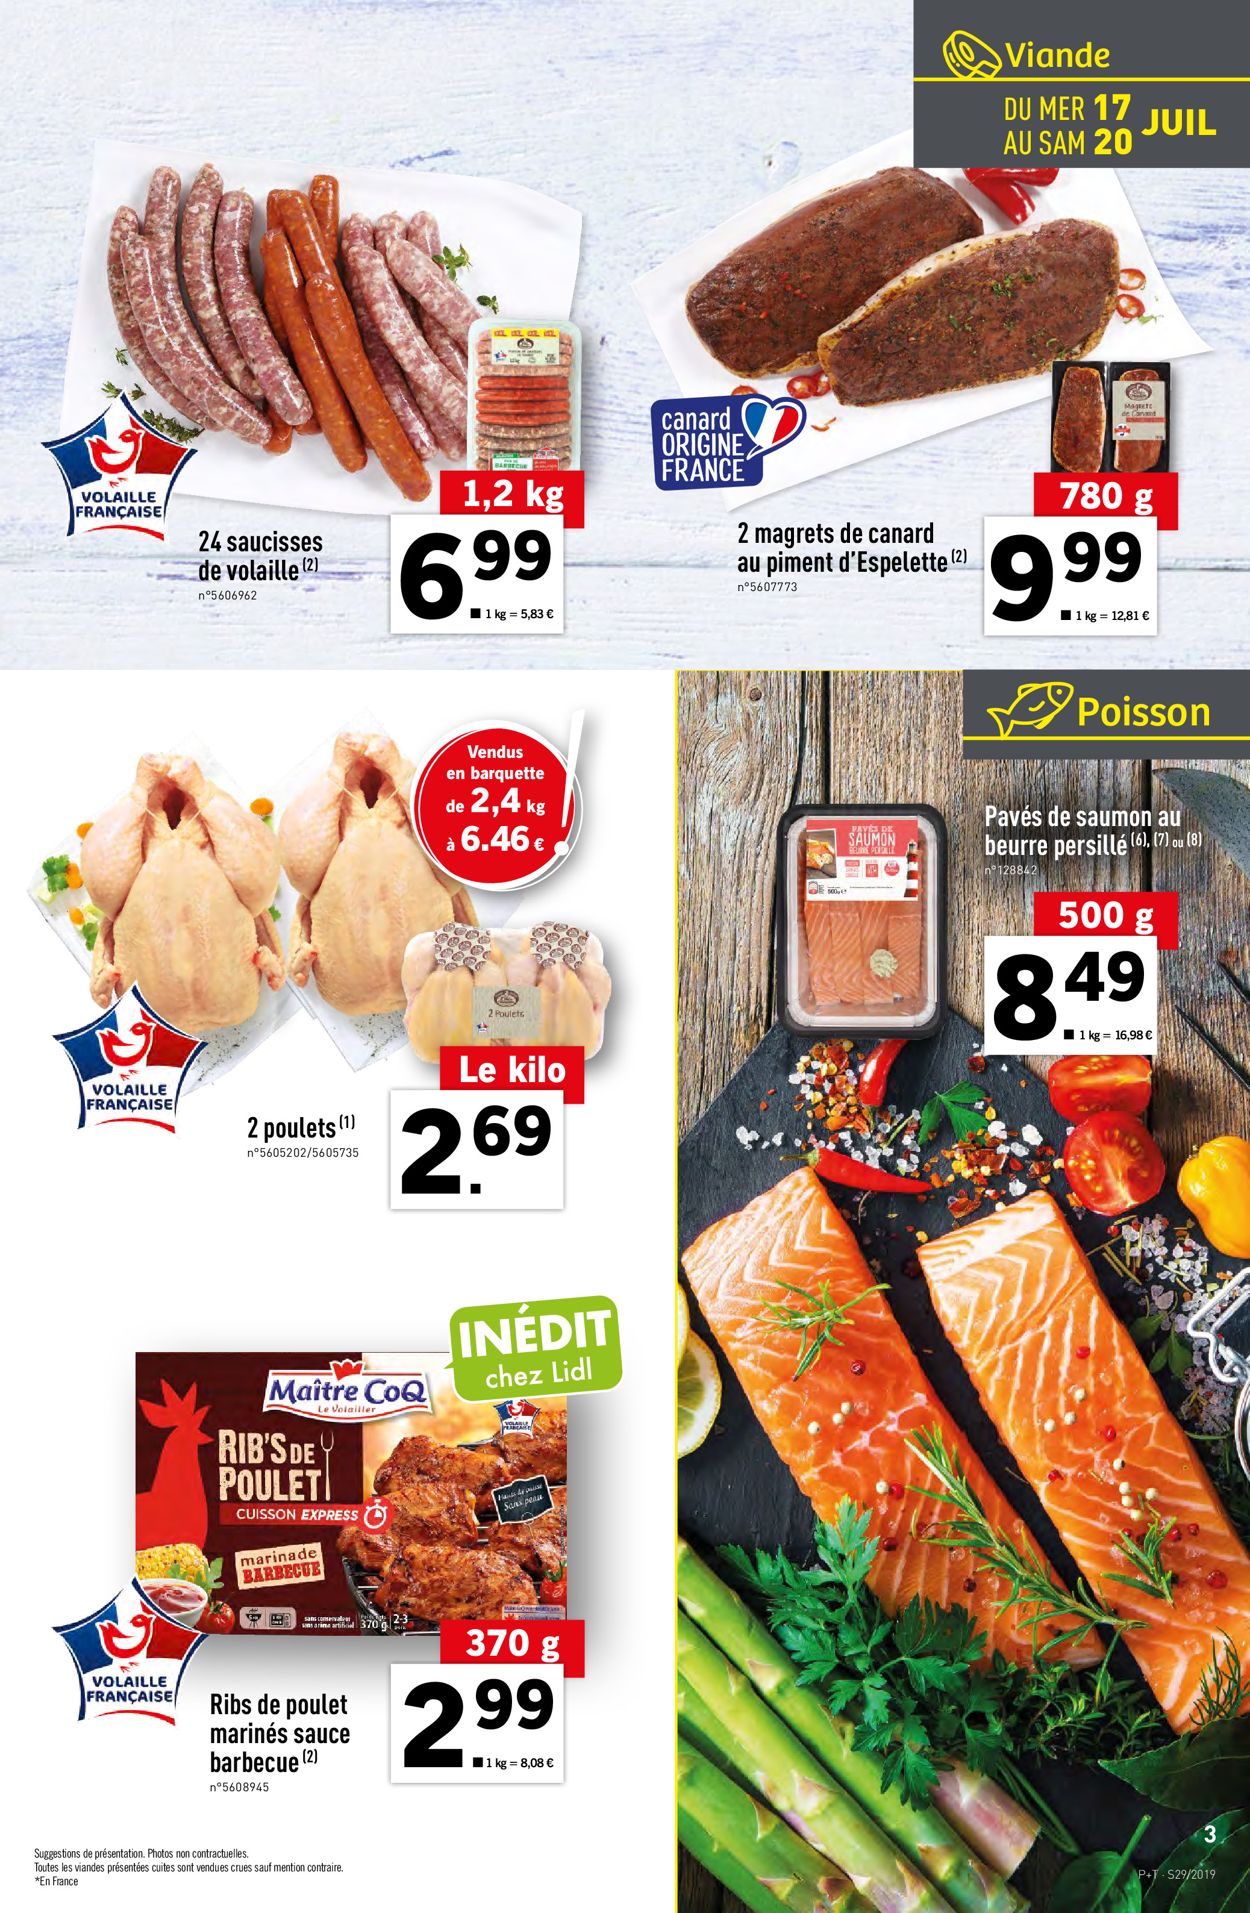 Lidl Catalogue - 17.07-23.07.2019 (Page 3)